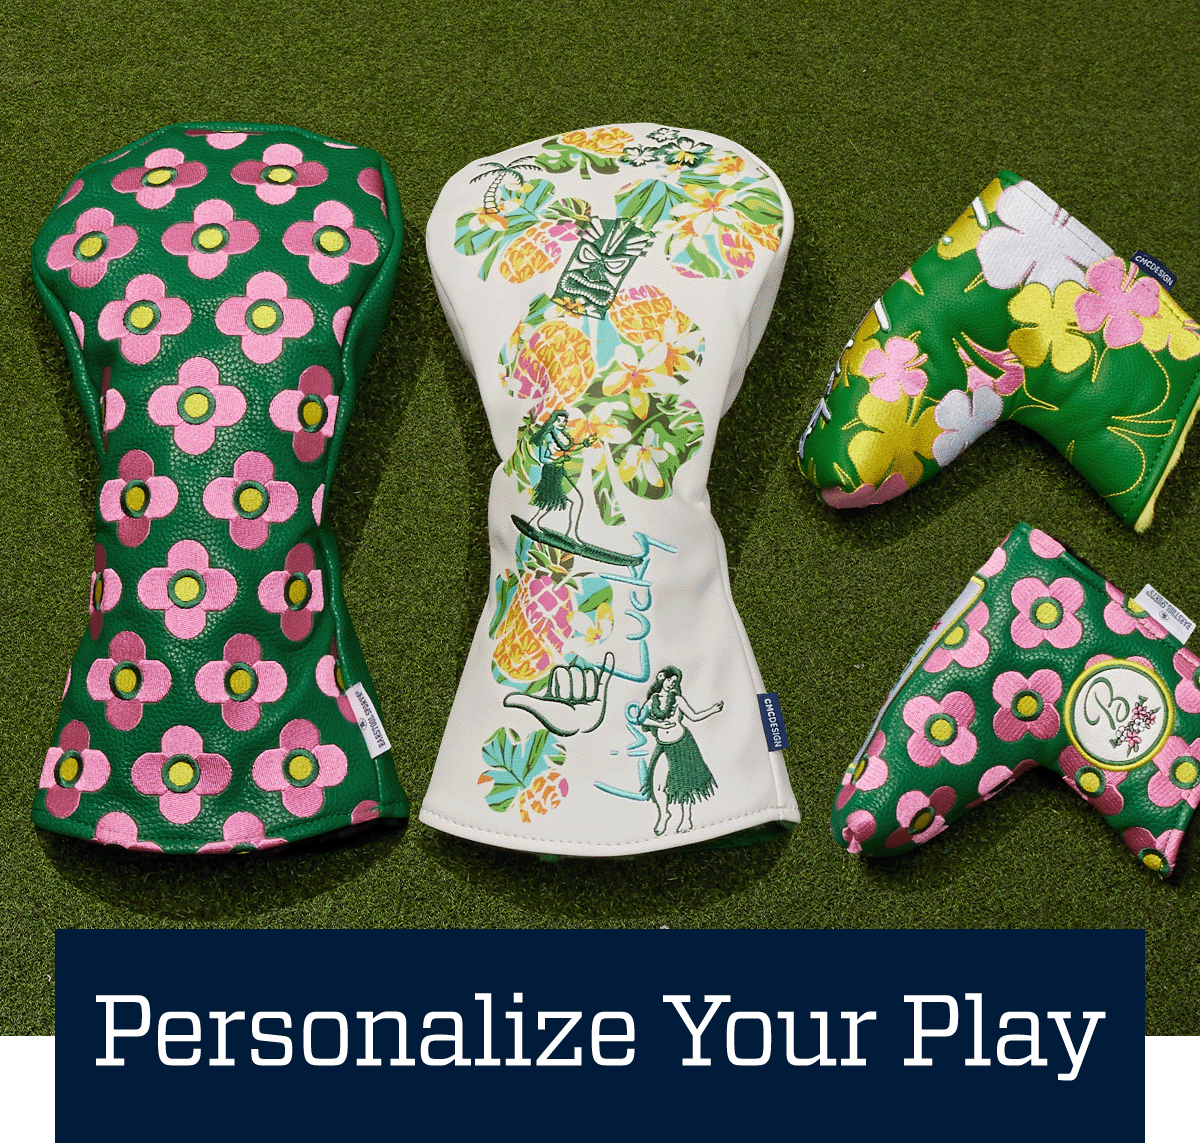 \xa0Personalize your play.